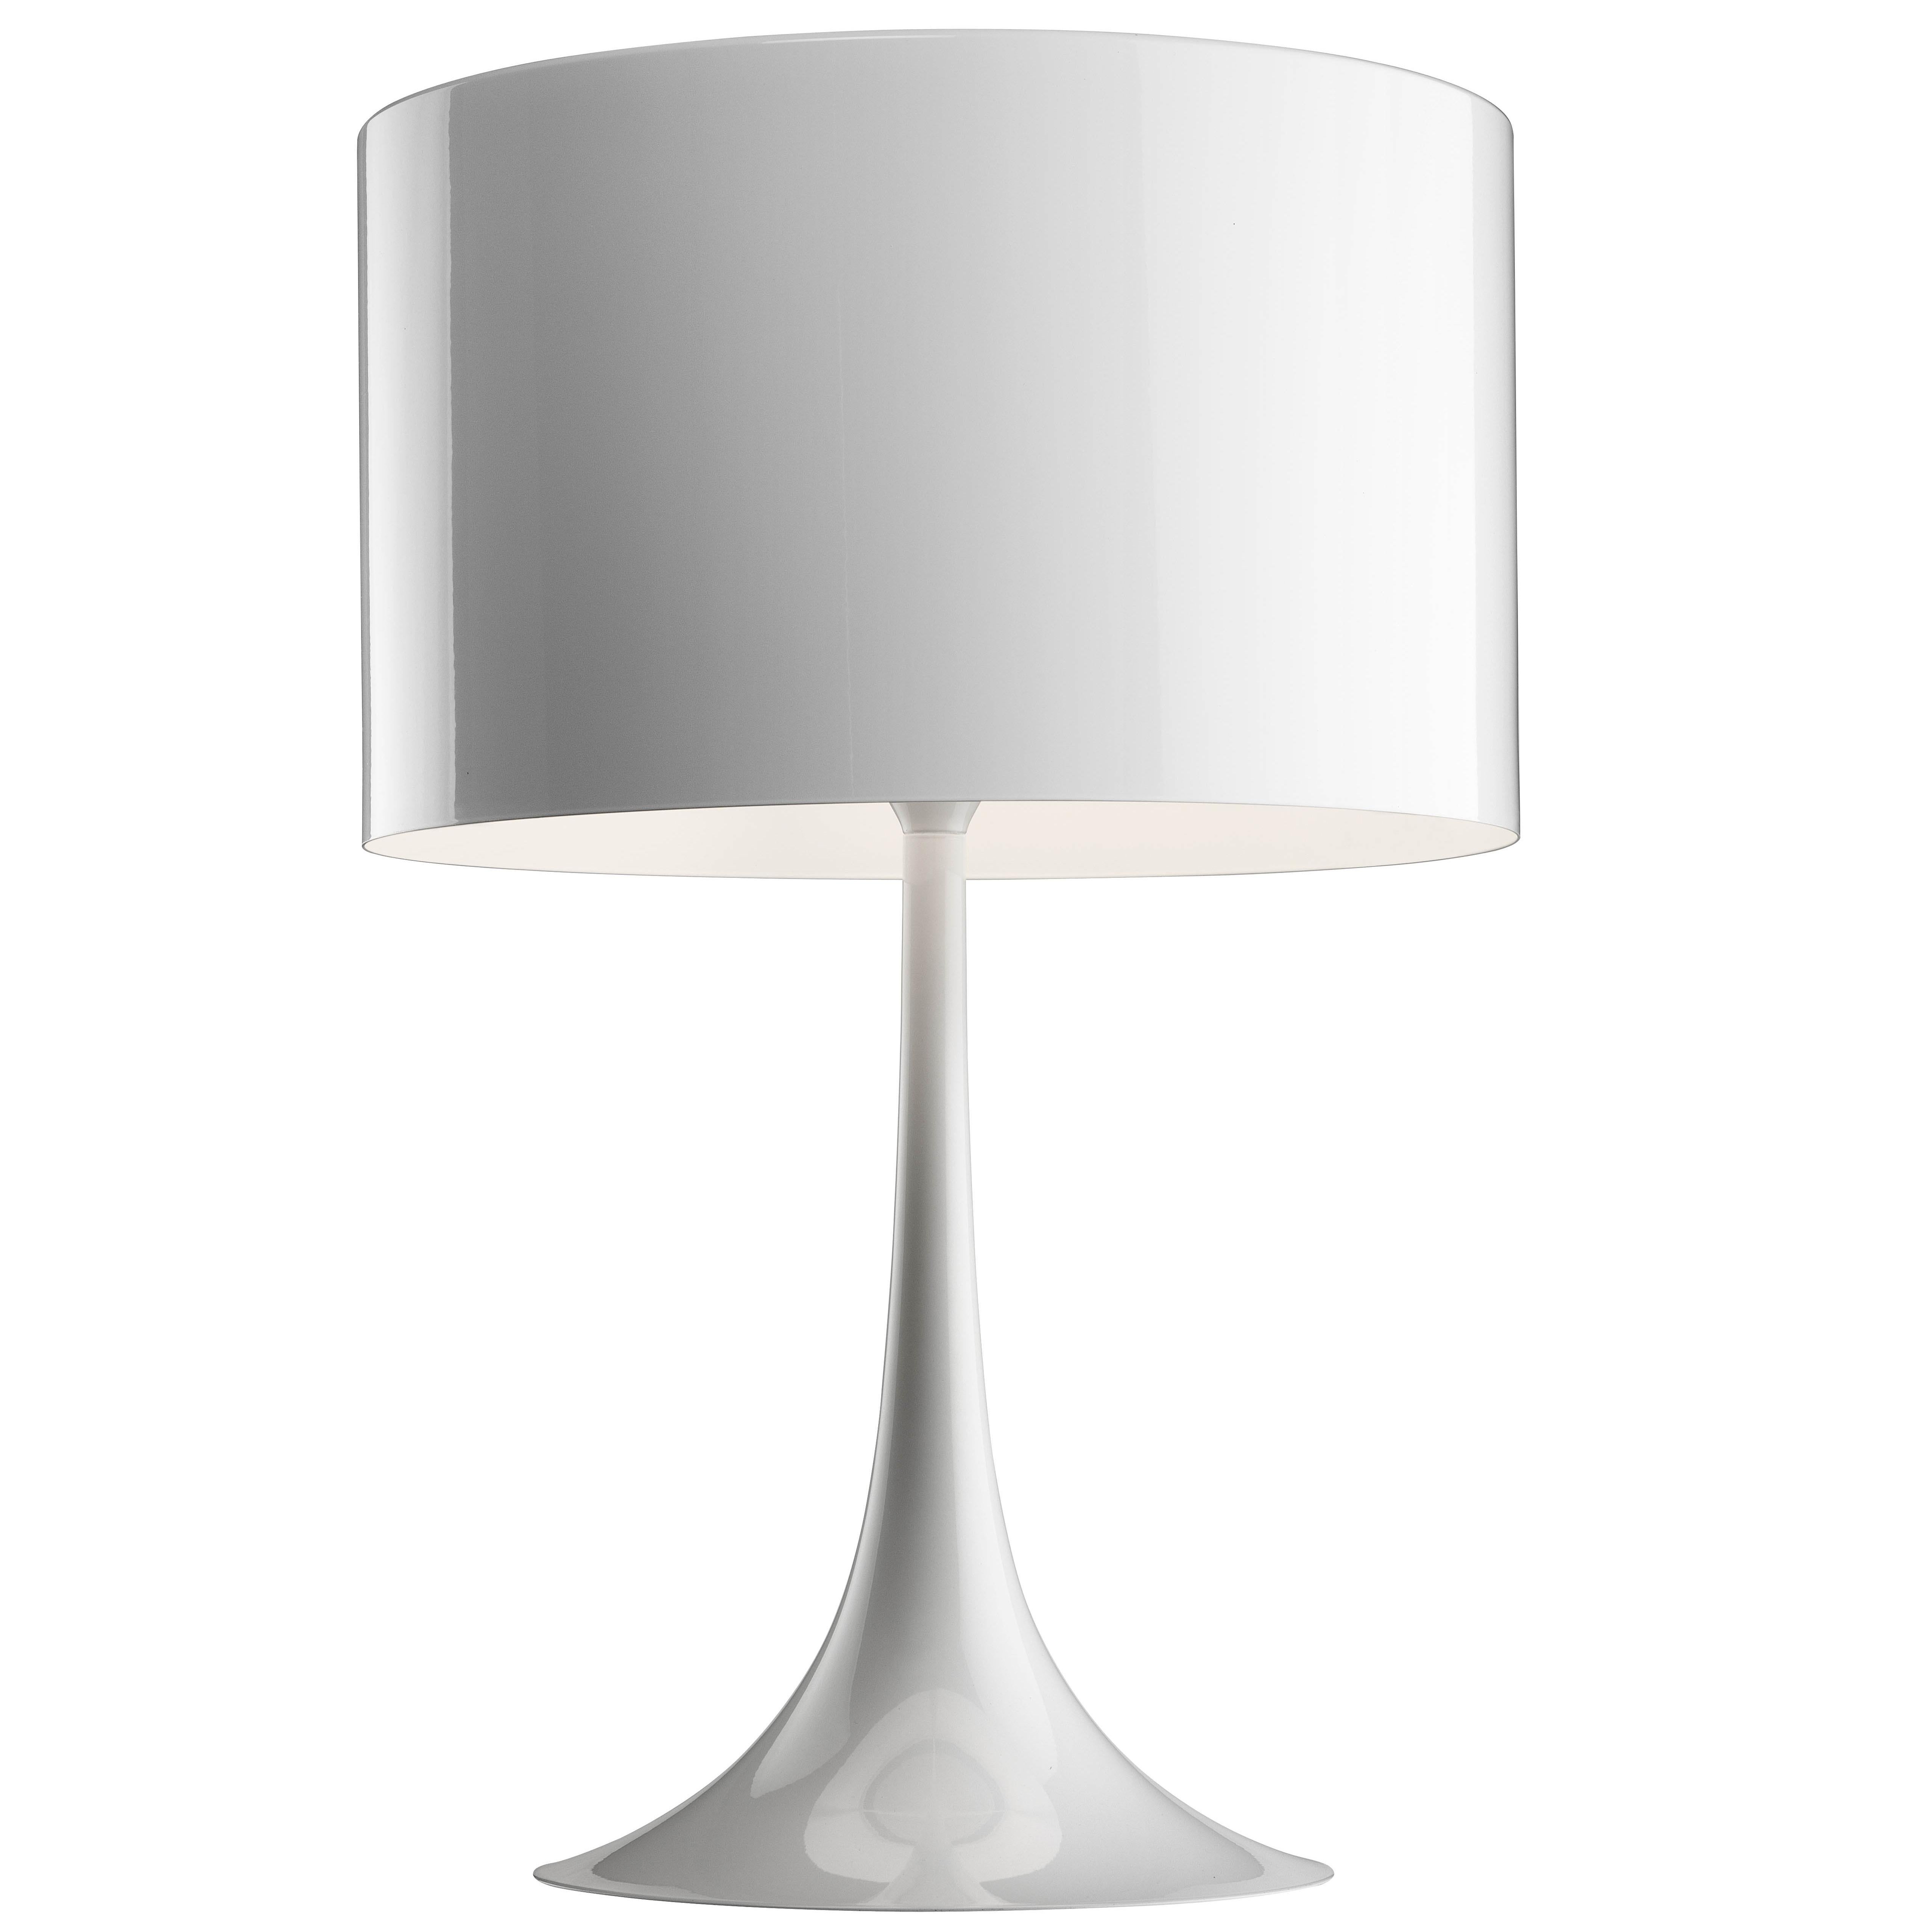 FLOS Spun T1 Halogen Table Lamp in Glossy White by Sebastian Wrong